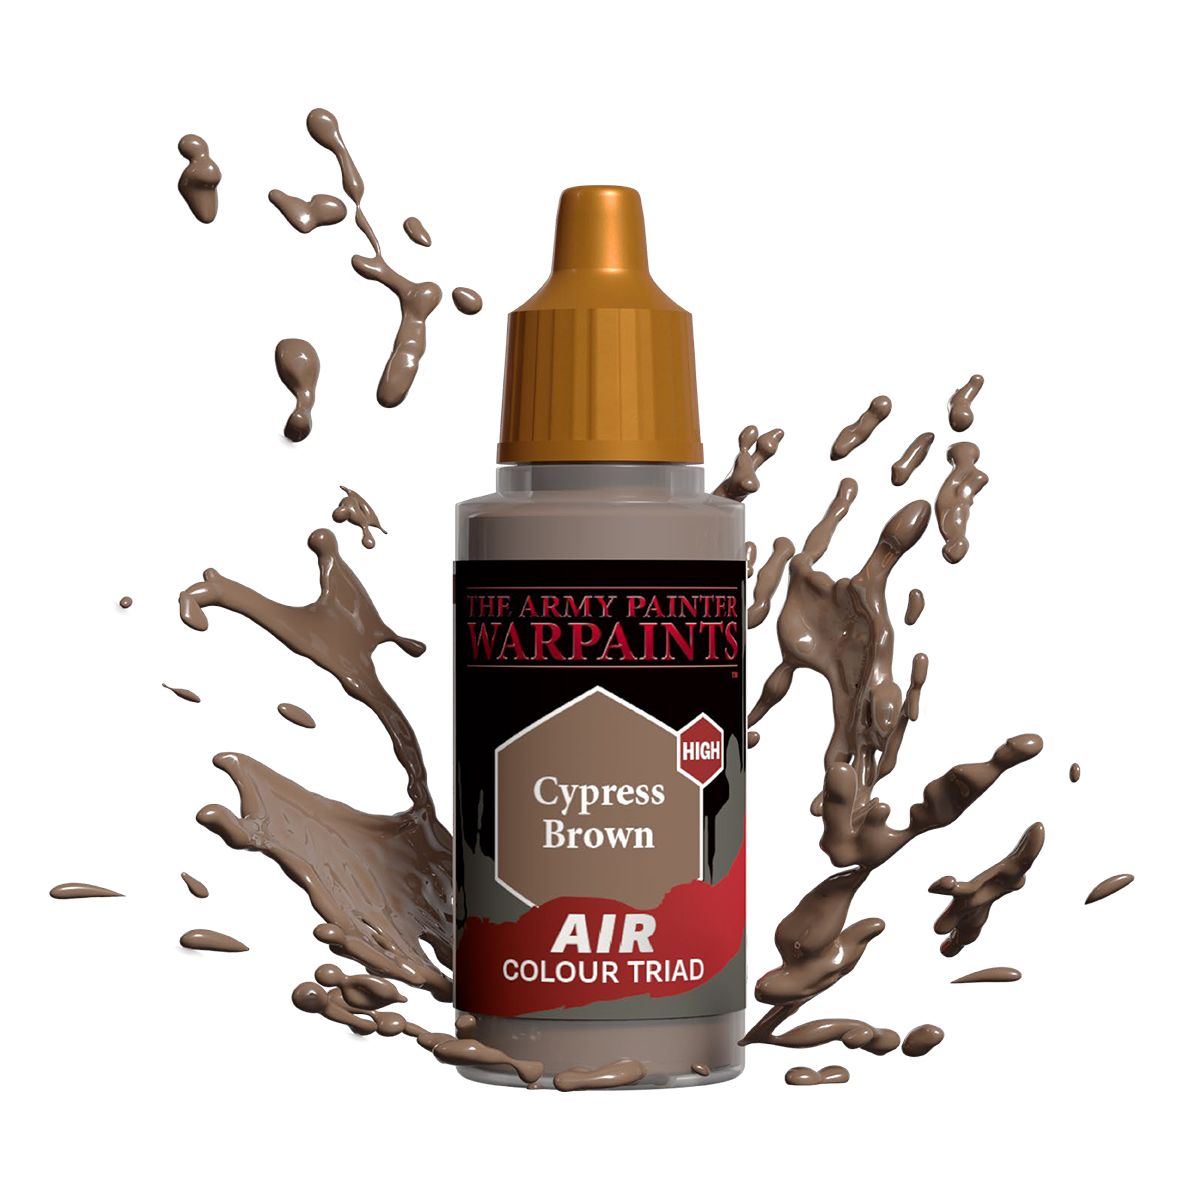 Army Painter Warpaints - Air Cypress Brown Acrylic Paint 18ml